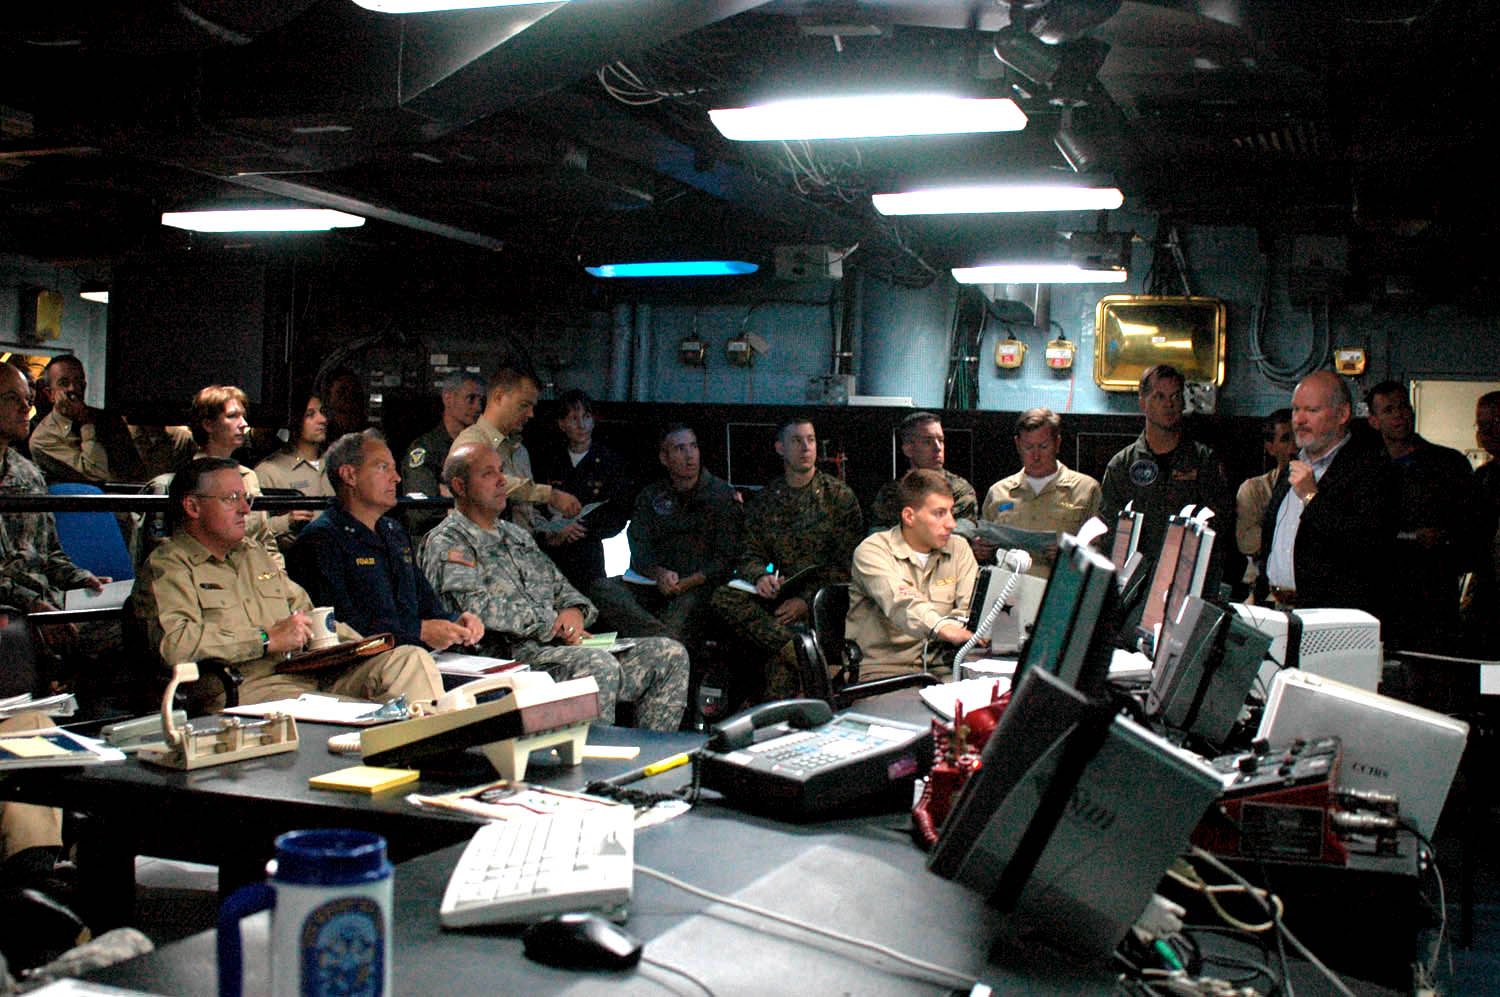 US_Navy_060821-N-6544L-003_Members_of_Joint_Task_Force_%28JTF%29_Lebanon_attend_the_commander%27s_update_briefing_in_the_Joint_Operations_Center_aboard_the_amphibious_command_ship_USS_Mount_Whitney_%28LCC-JCC_20%29.jpg